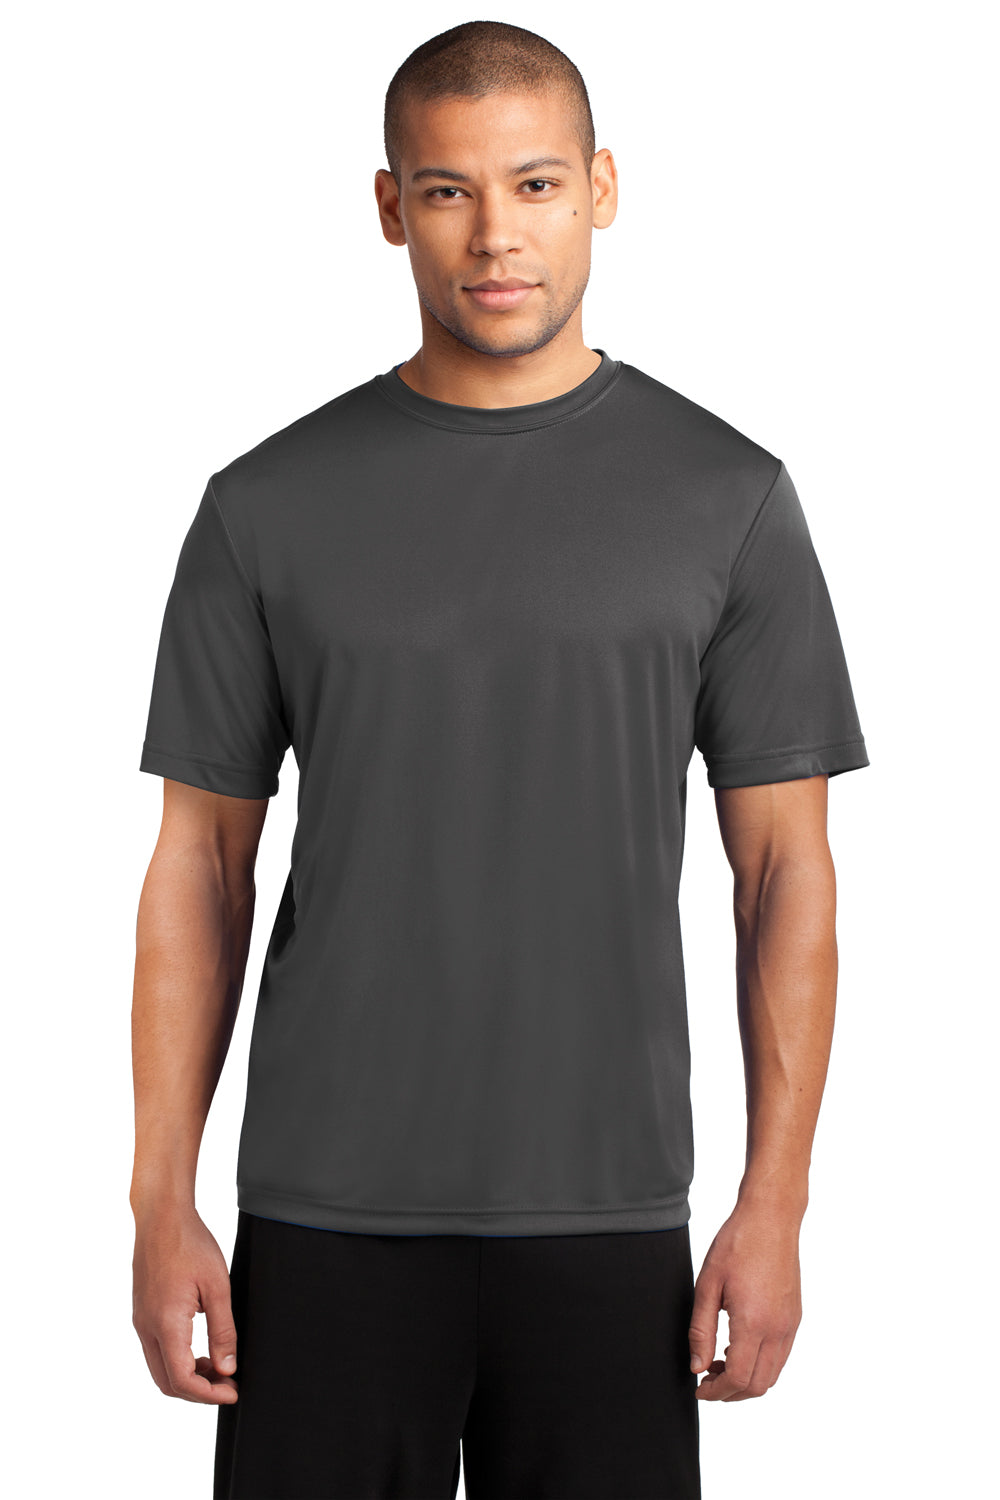 Port & Company PC380 Mens Dry Zone Performance Moisture Wicking Short Sleeve Crewneck T-Shirt Charcoal Grey Front